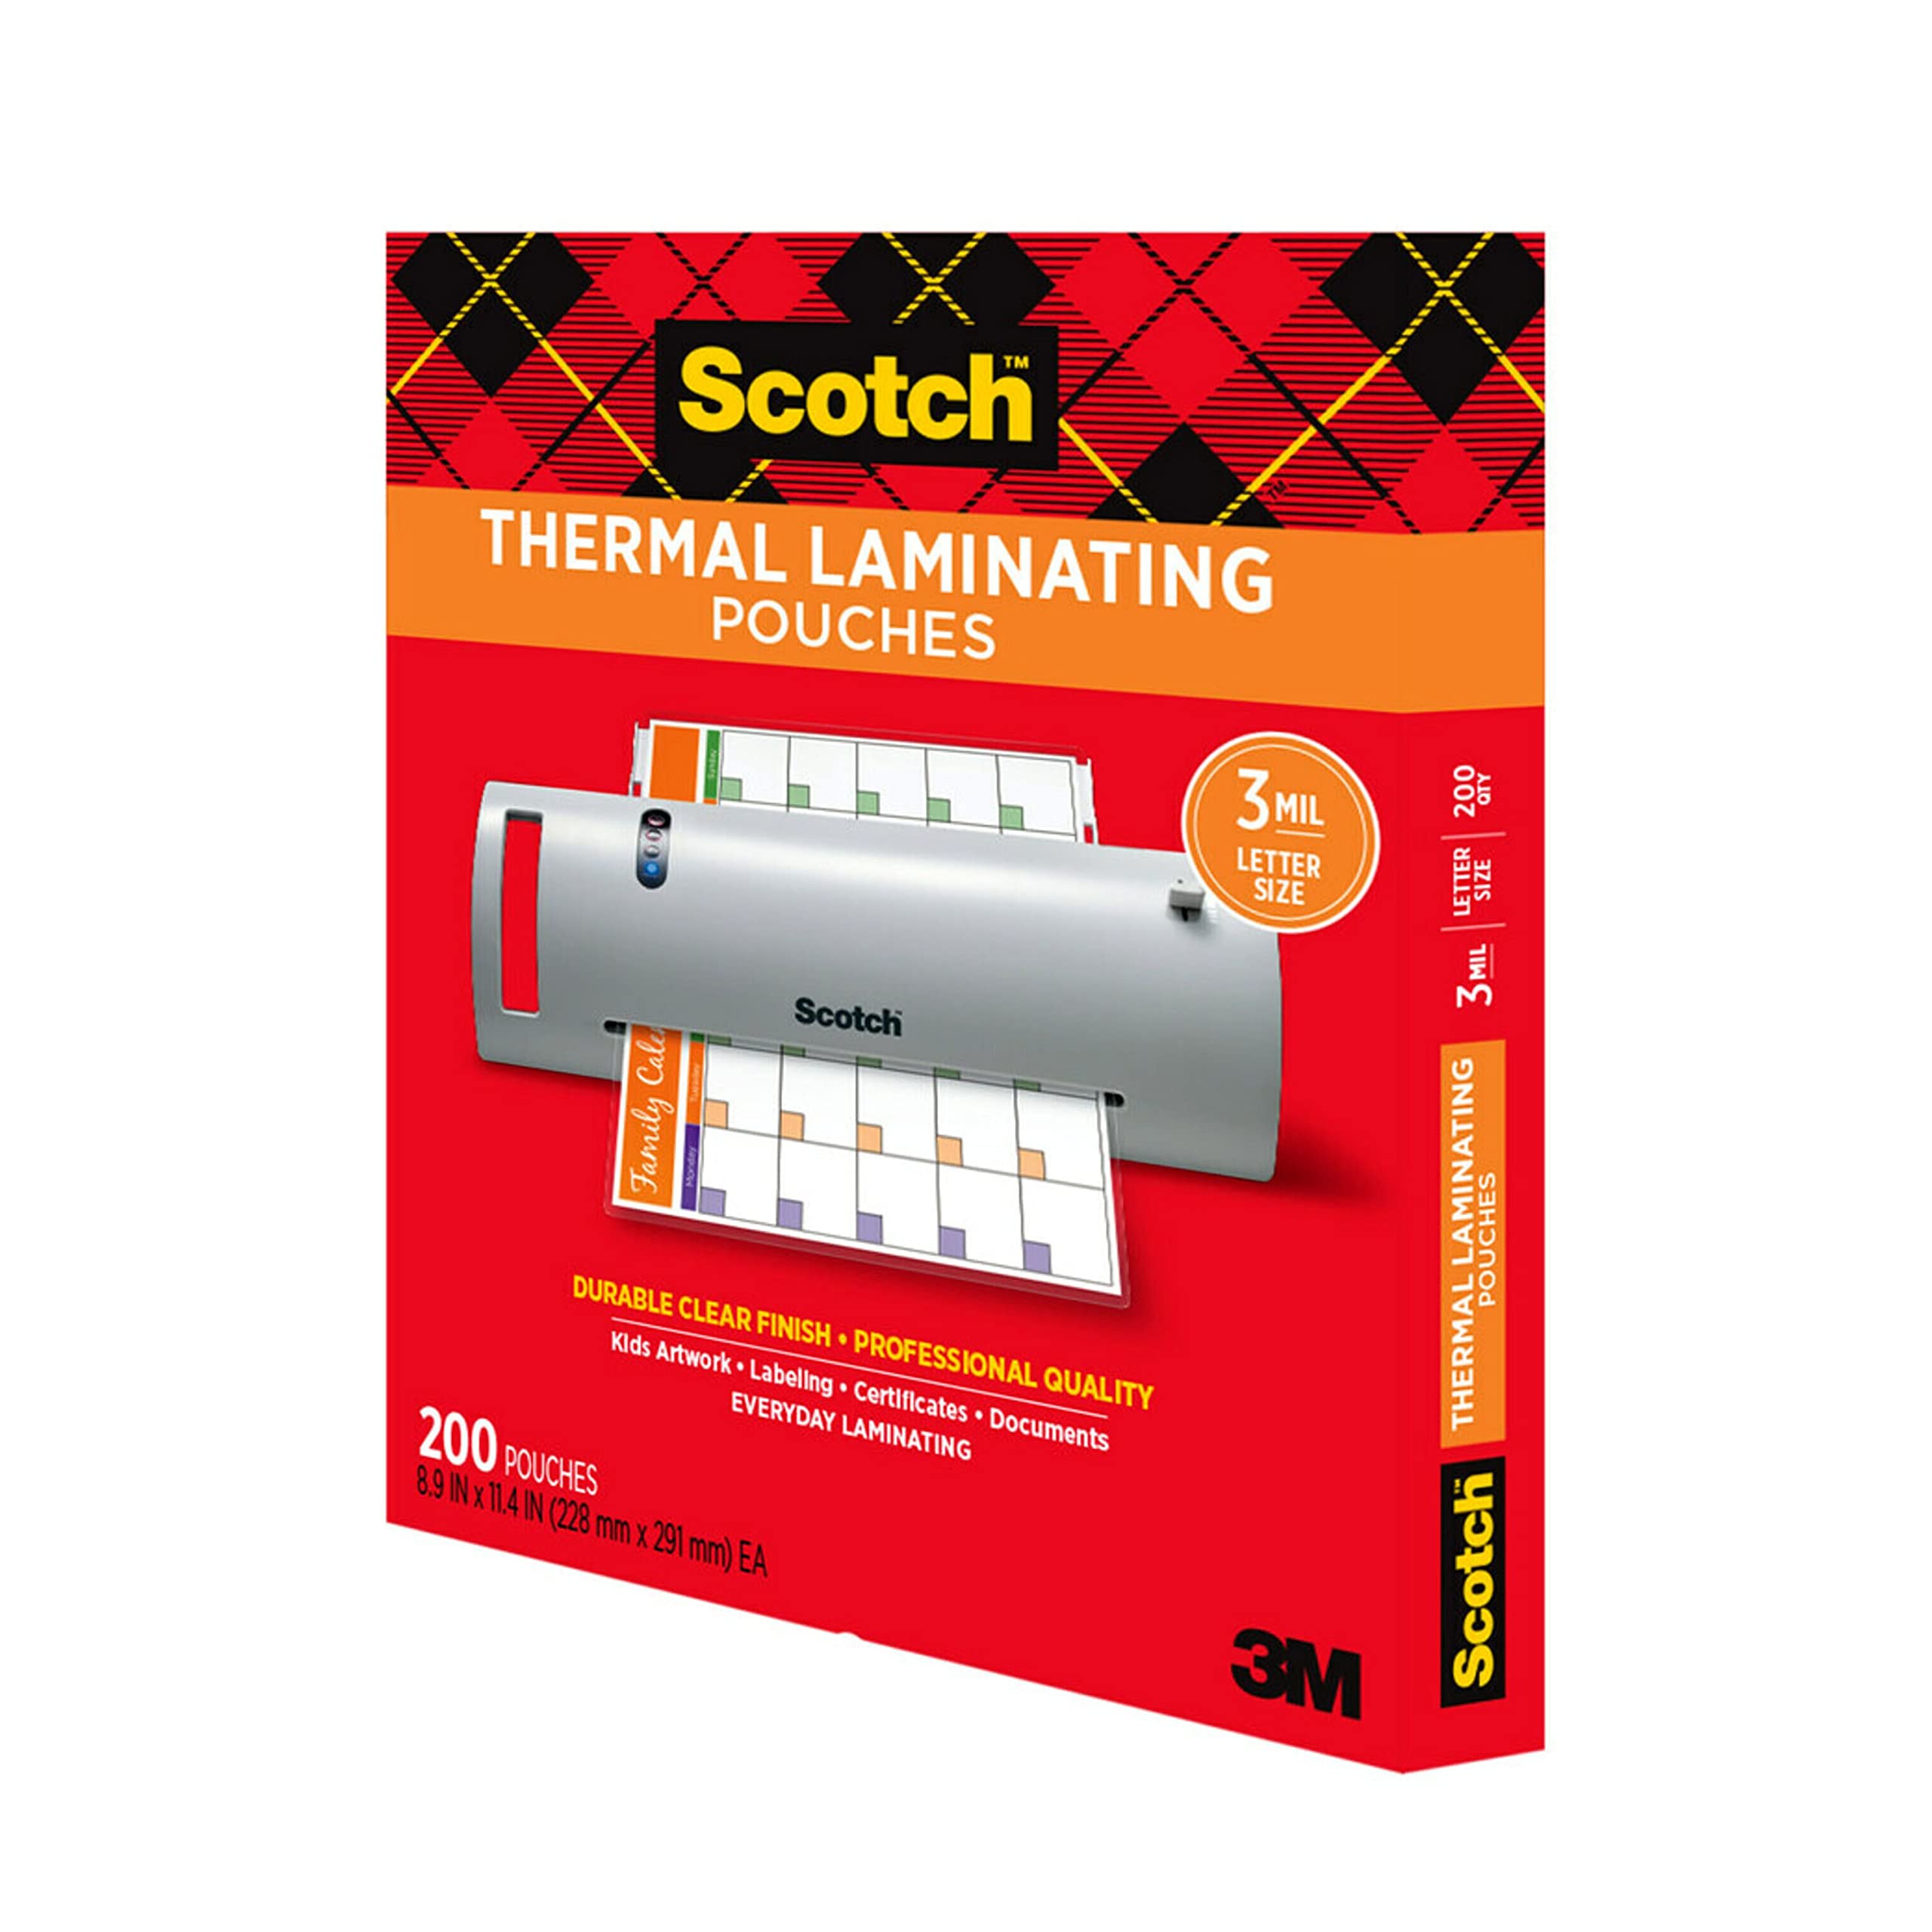 Scotch Thermal Laminating Pouches, 200 Pack Laminating Sheets, 3 Mil, 8.9 x 11.4 Inches, Education Supplies & Craft Supplies, For Use With Thermal Laminators, Letter Size Sheets (TP3854-200)